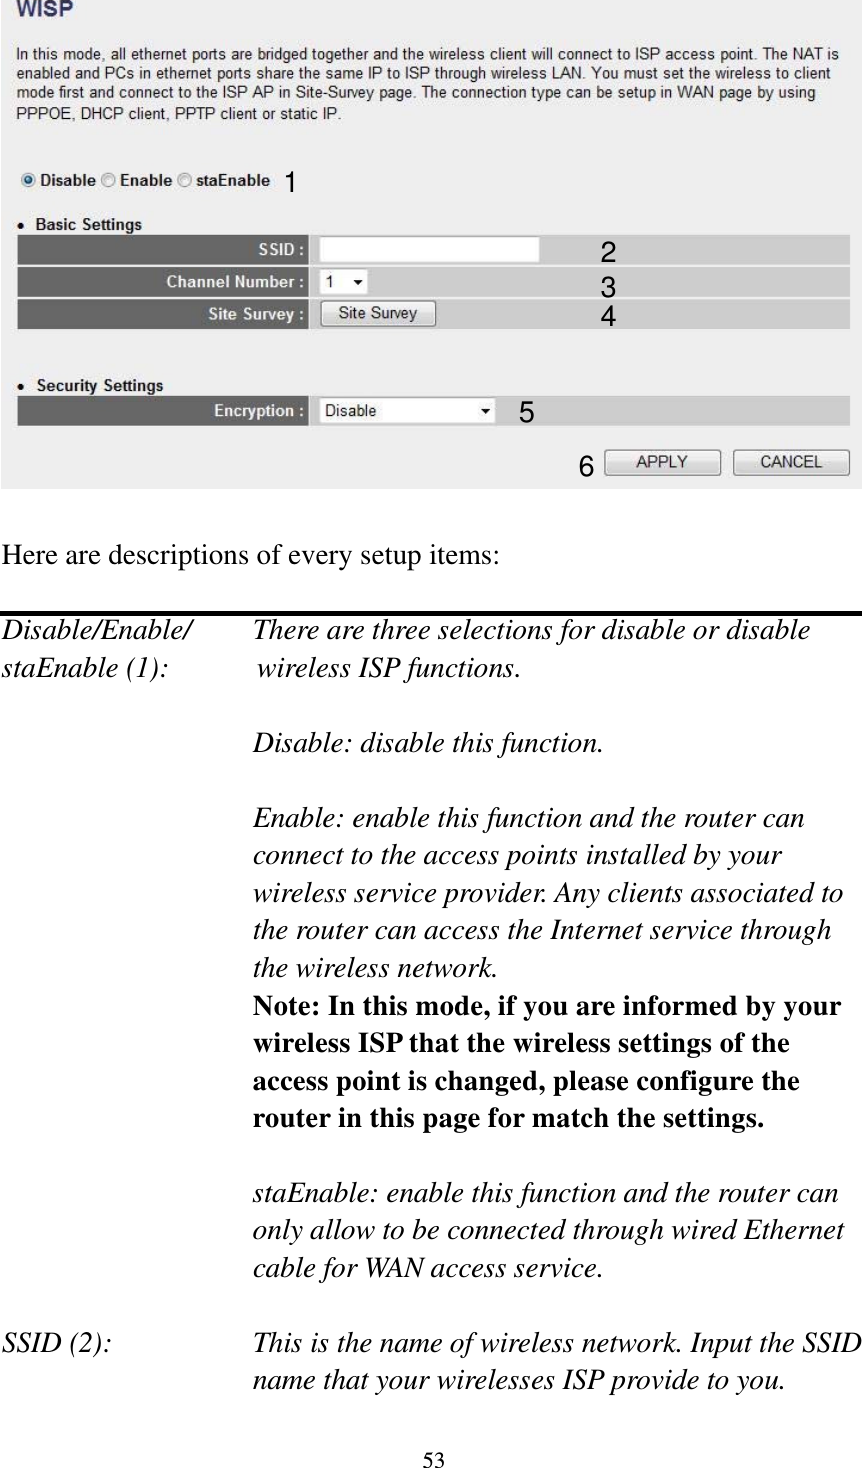 53   Here are descriptions of every setup items:  Disable/Enable/    There are three selections for disable or disable   staEnable (1):      wireless ISP functions.  Disable: disable this function.  Enable: enable this function and the router can connect to the access points installed by your wireless service provider. Any clients associated to the router can access the Internet service through the wireless network. Note: In this mode, if you are informed by your wireless ISP that the wireless settings of the access point is changed, please configure the router in this page for match the settings.  staEnable: enable this function and the router can only allow to be connected through wired Ethernet cable for WAN access service.  SSID (2):    This is the name of wireless network. Input the SSID name that your wirelesses ISP provide to you. 1 2345 6